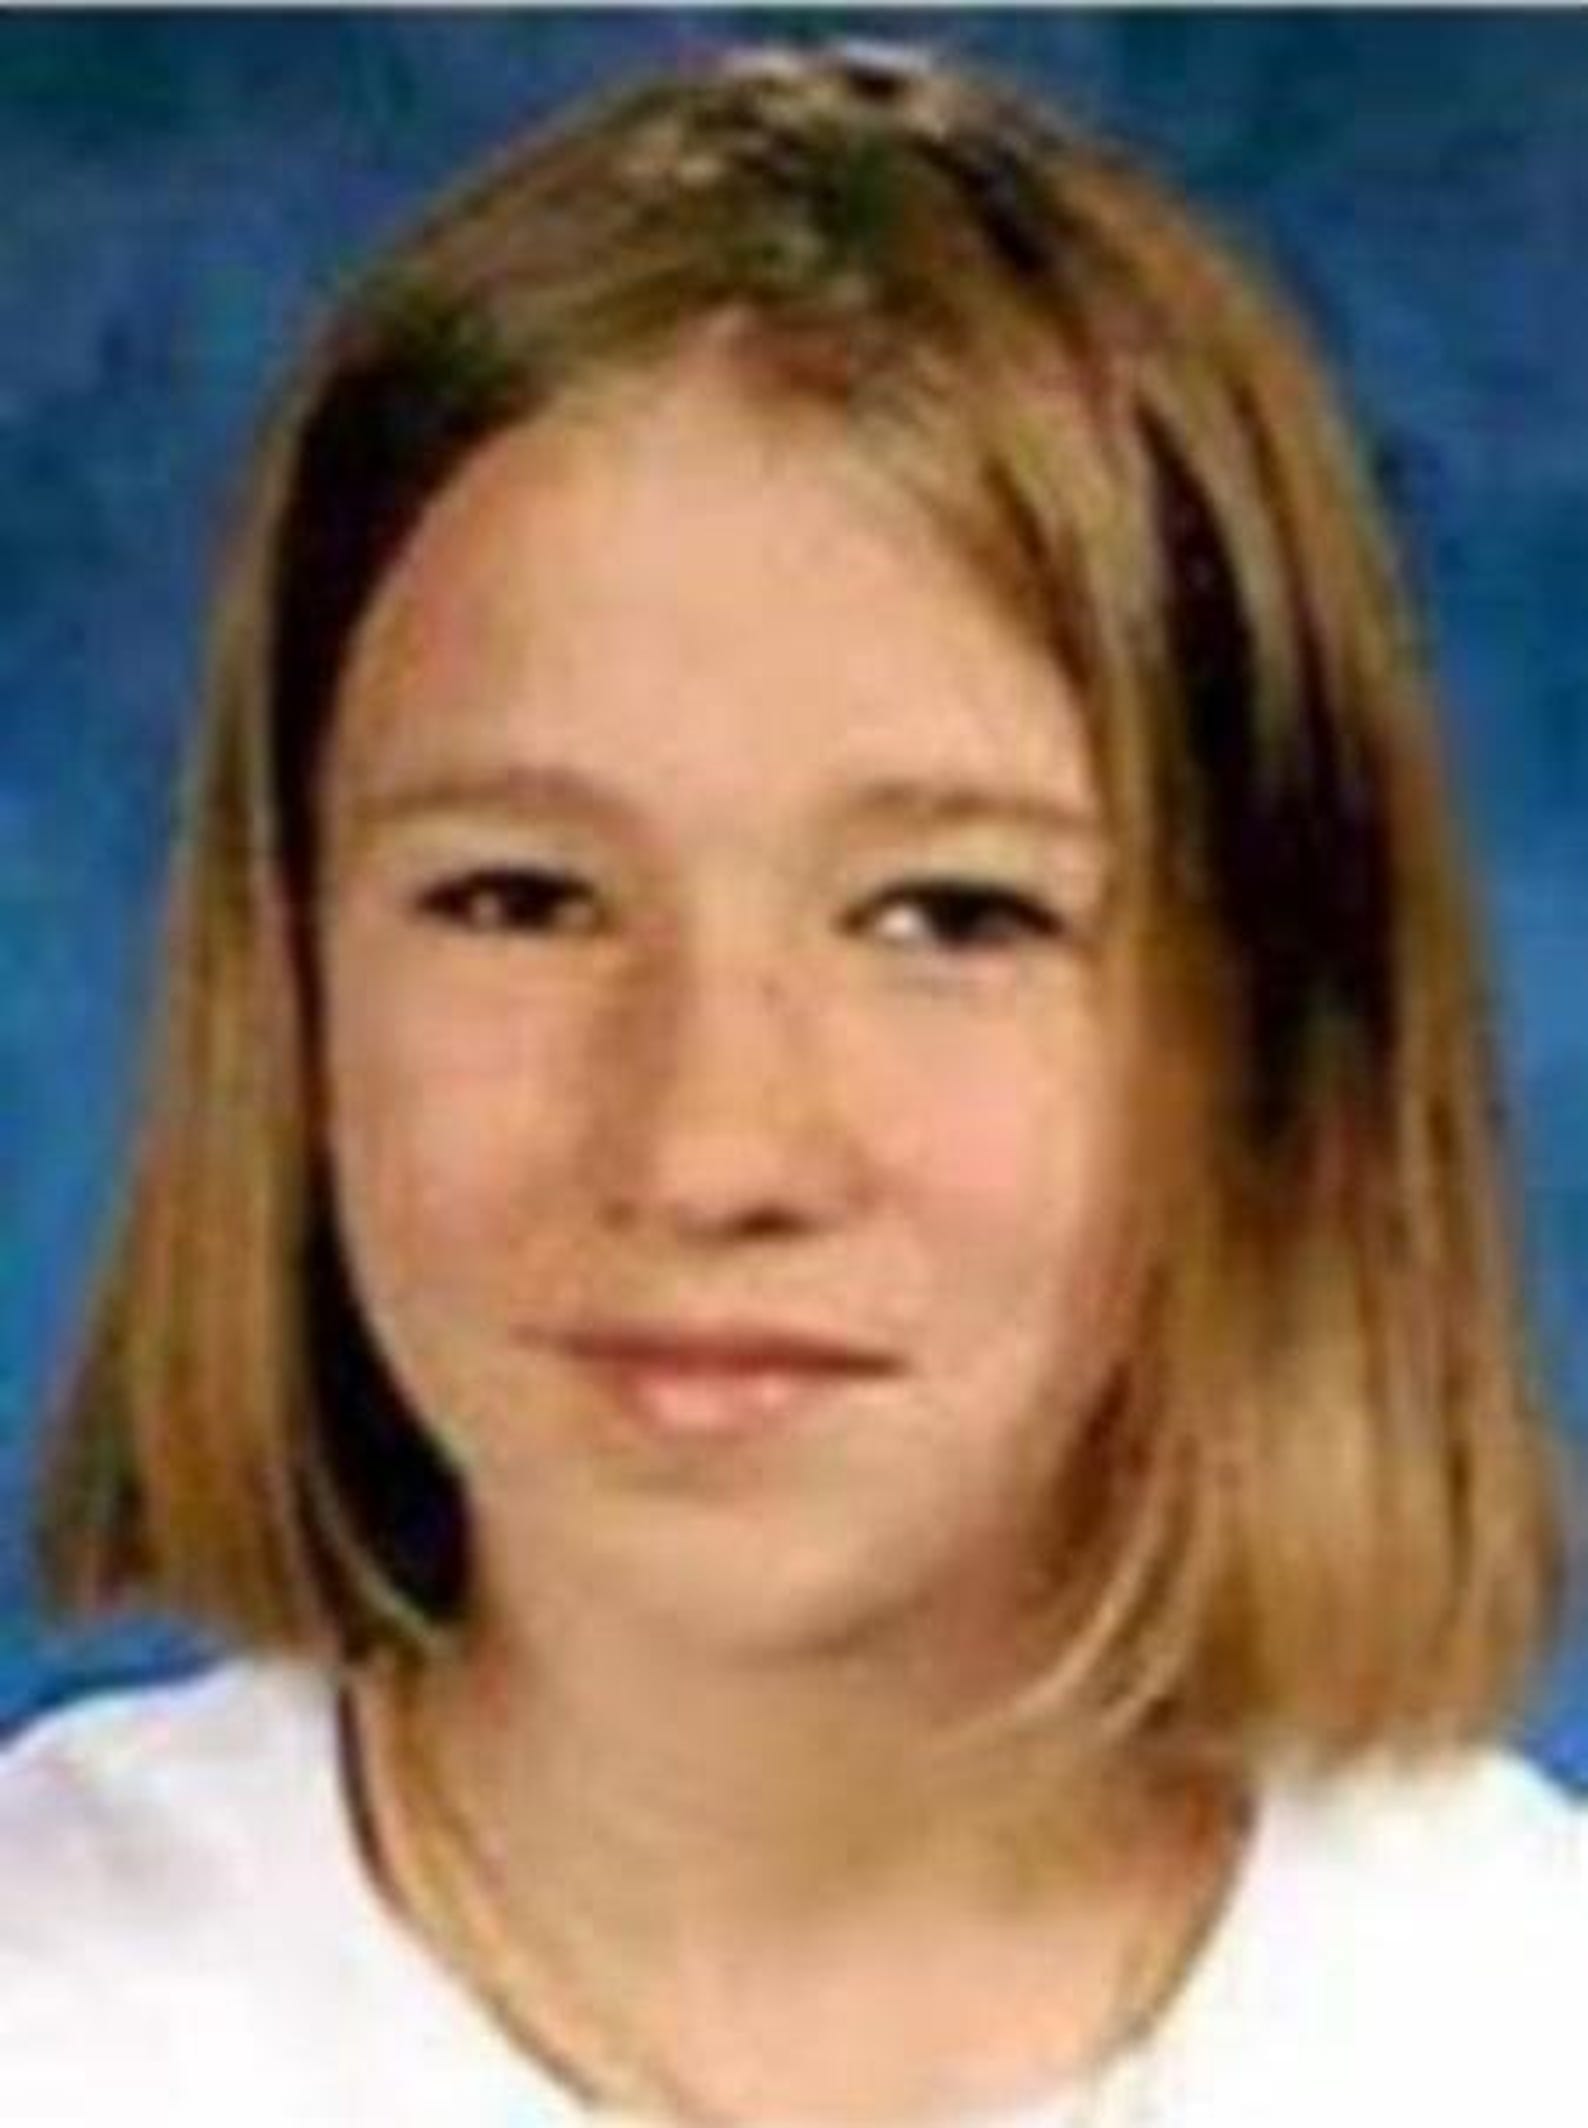 Tabitha Danielle Tuders was 13 when he went missing from Nashville, Tennessee, on April 29, 2003. More information and age-progressed photos here.